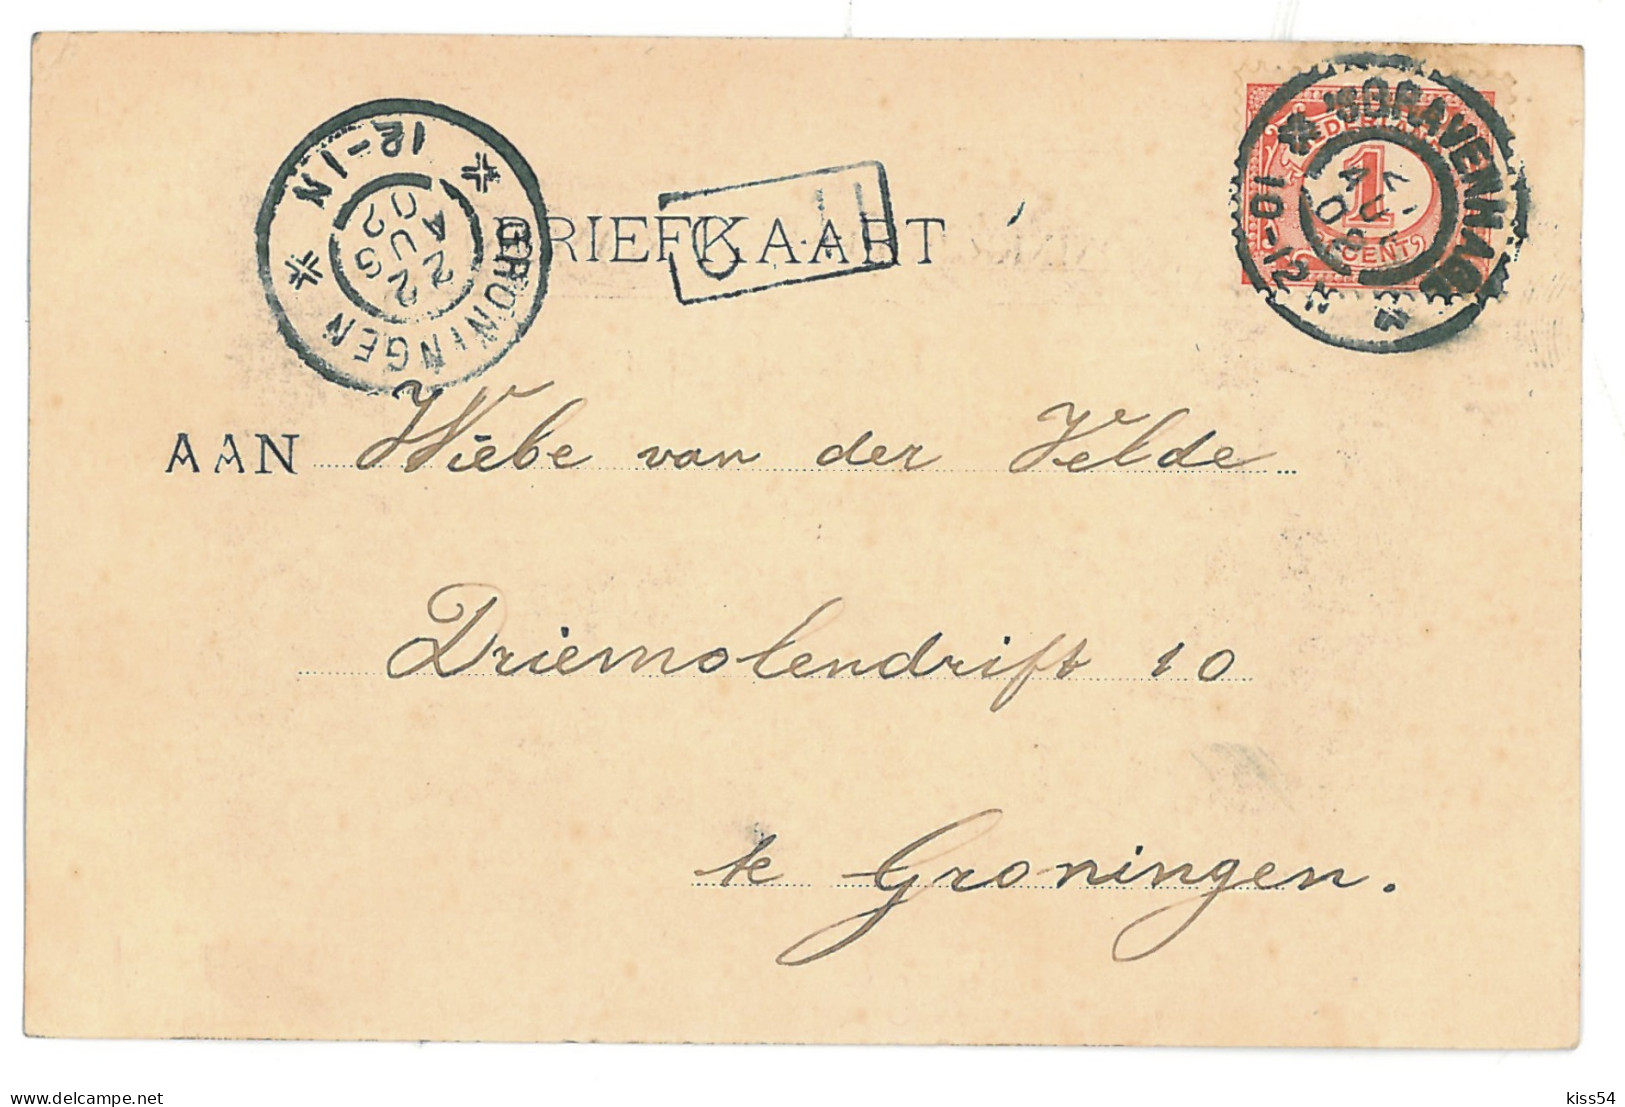 NED 4 - 12210 HOLLAND, Litho, Banknote 10 Gulden - Old Postcard - Used - 1902  - Münzen (Abb.)